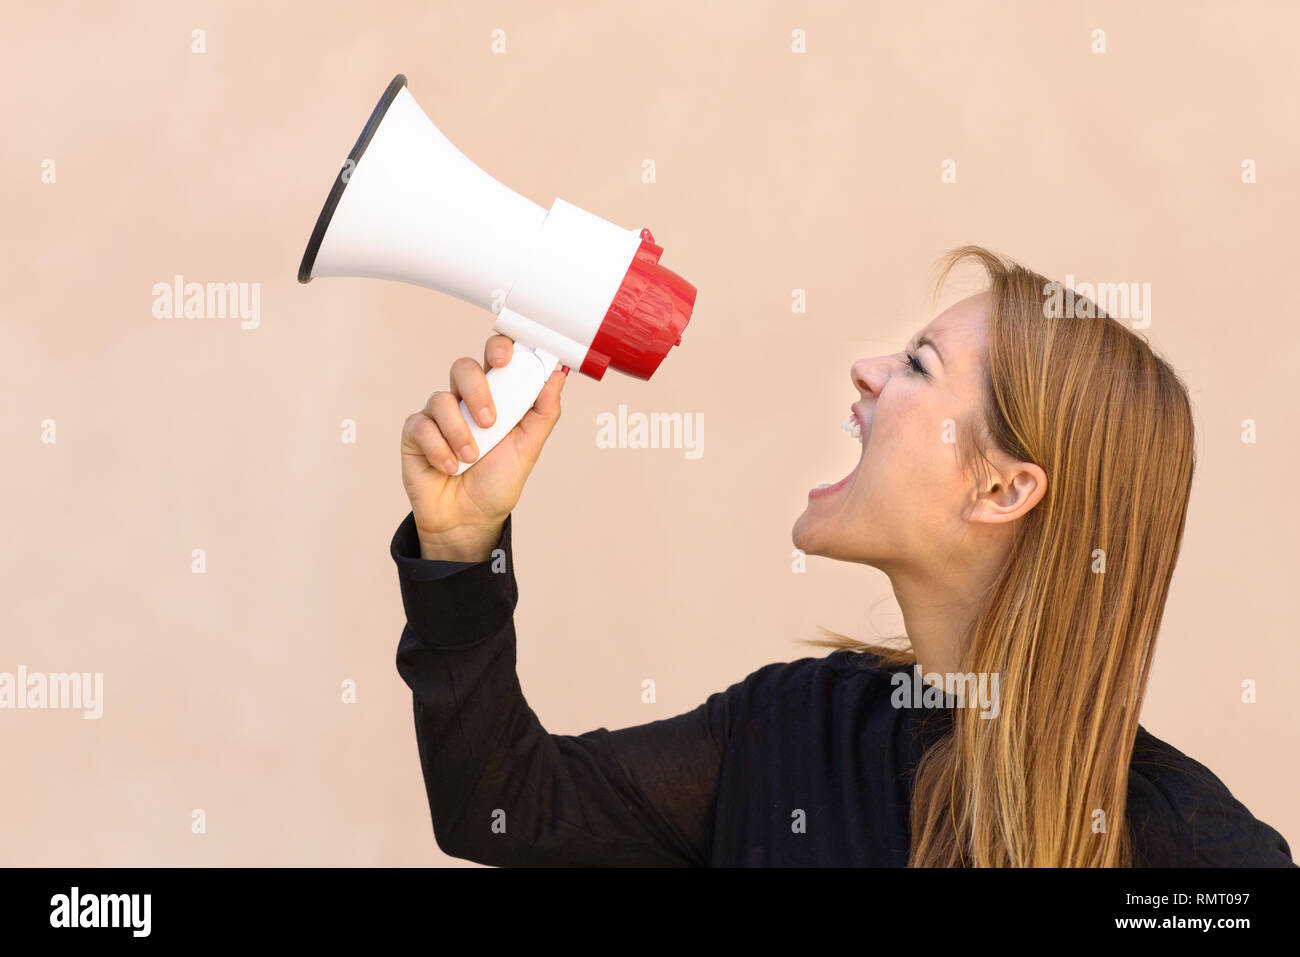 Angry woman yelling into a megaphone or bullhorn in a profile view conceptual of a protest, demonstration and airing grievances Stock Photo